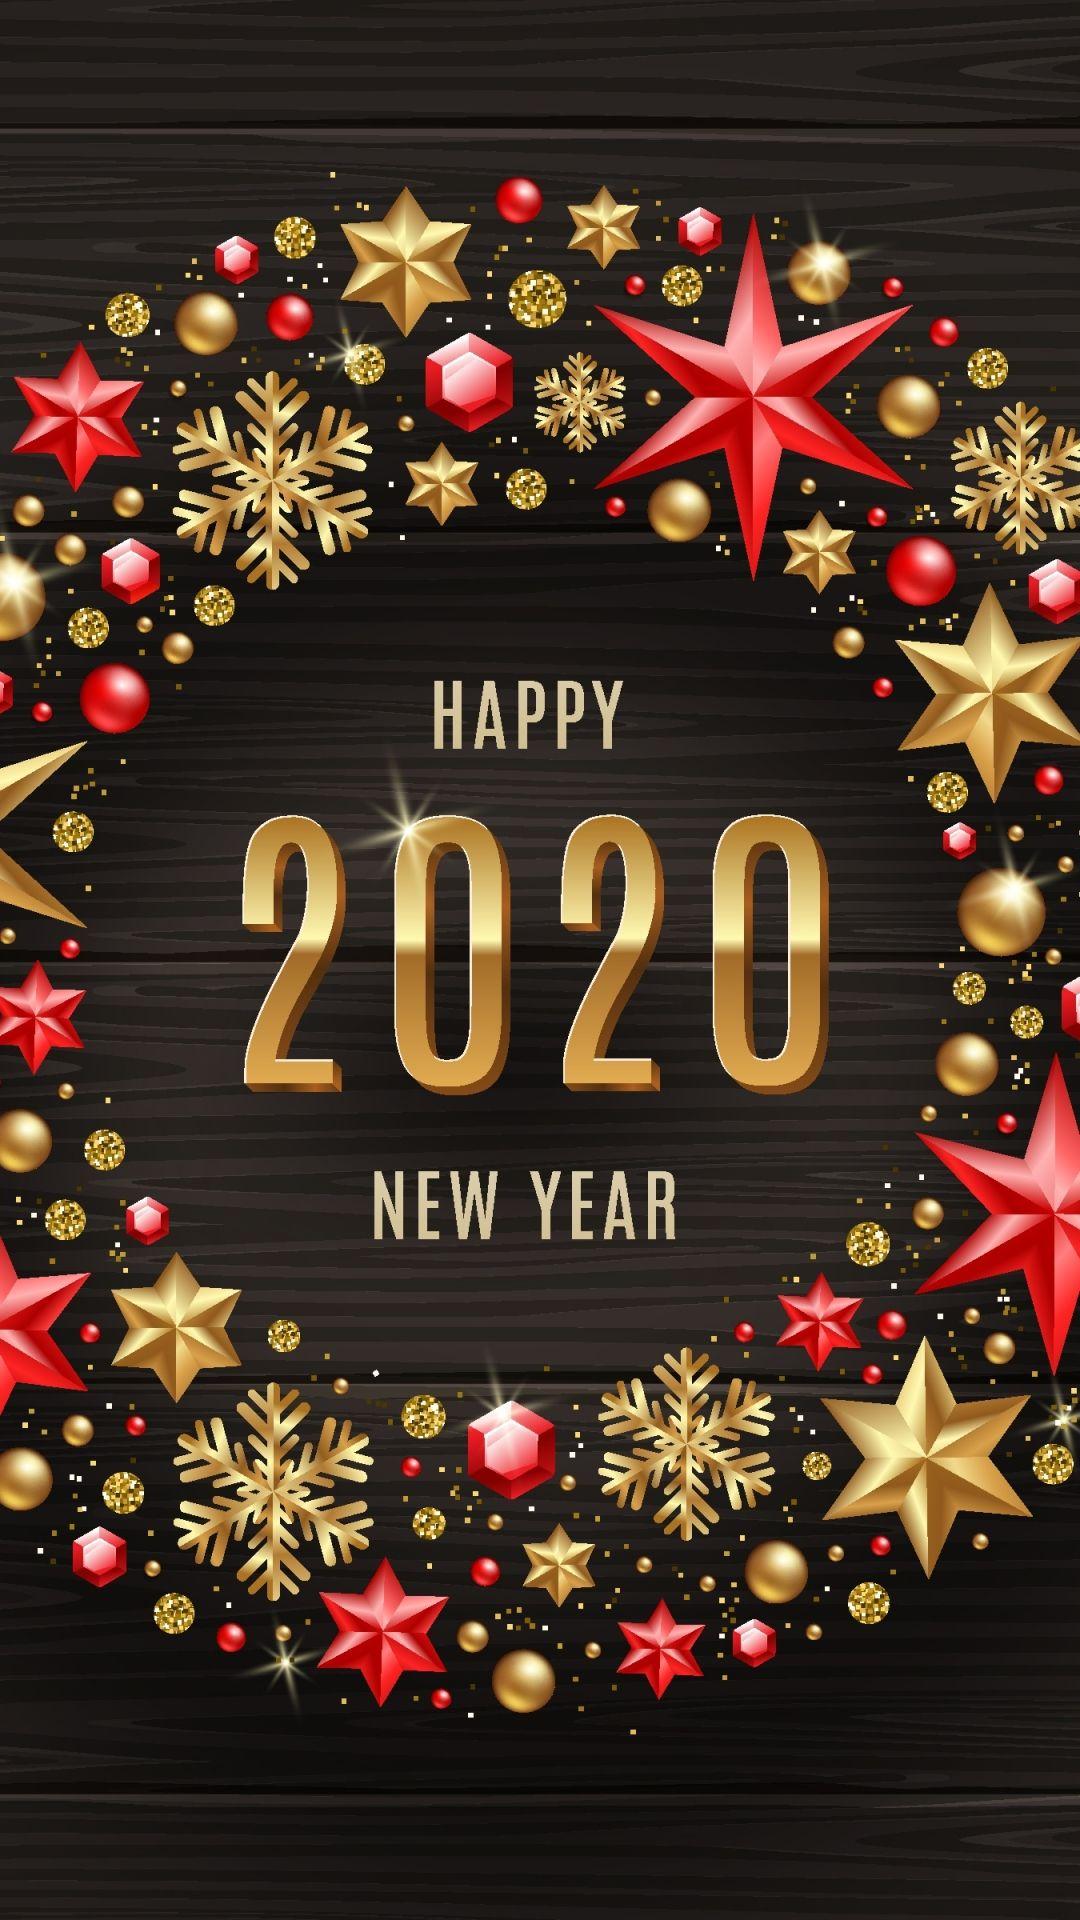 Free download Download Happy New Year 2020 Wishes Wallpaper